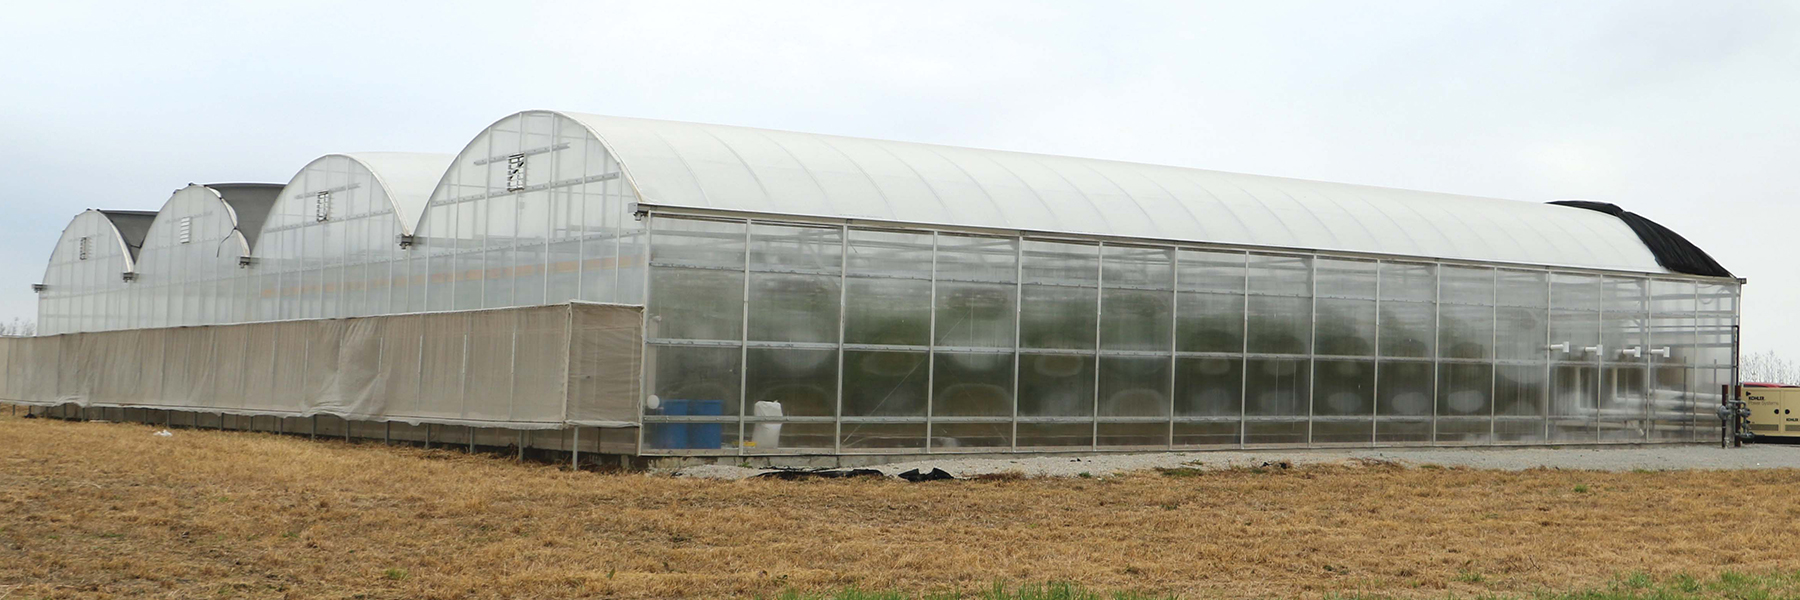 hydroponic industrial greenhouse